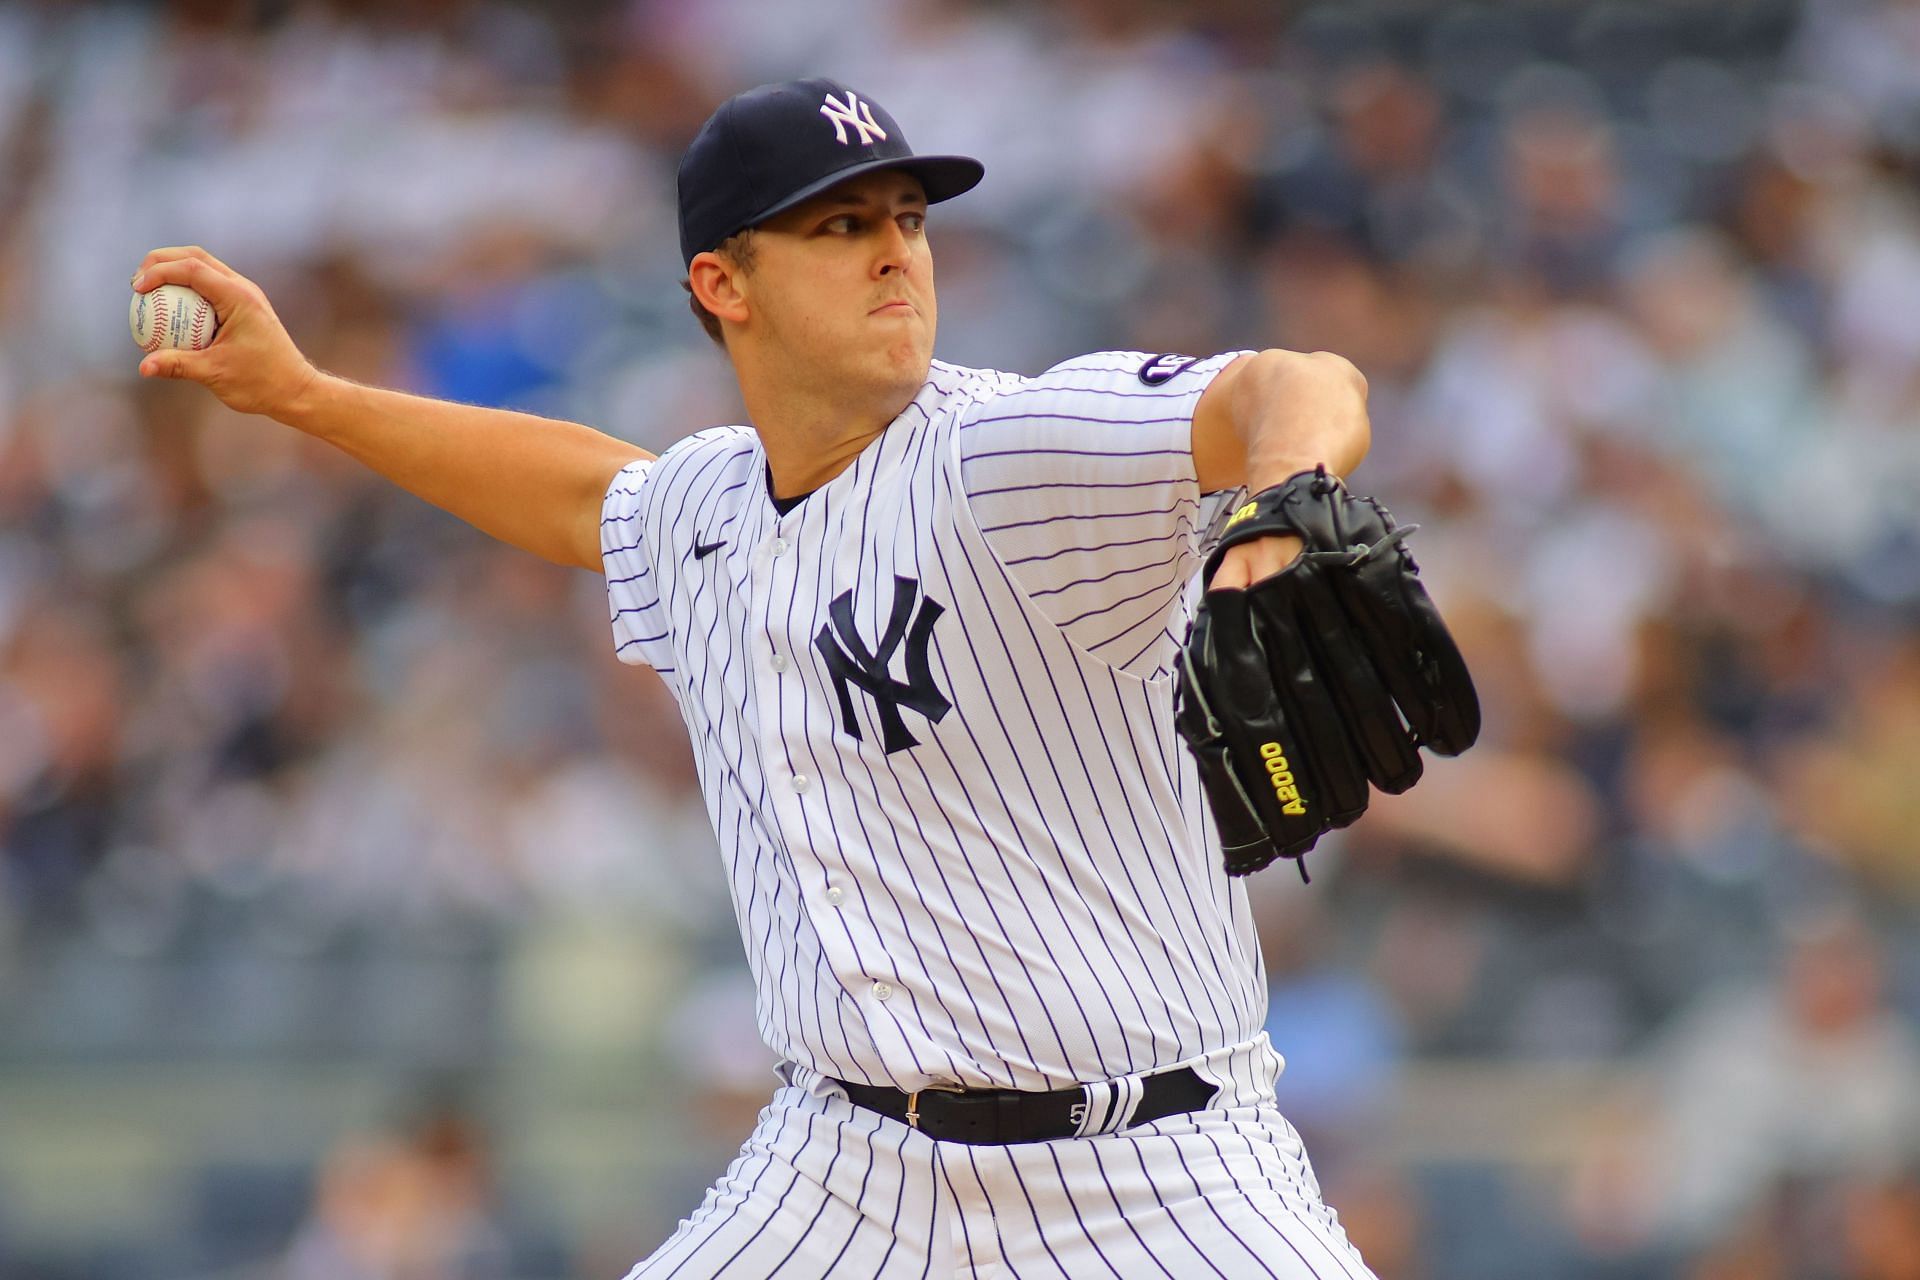 Jameson Taillon pitching for the New York Yankees